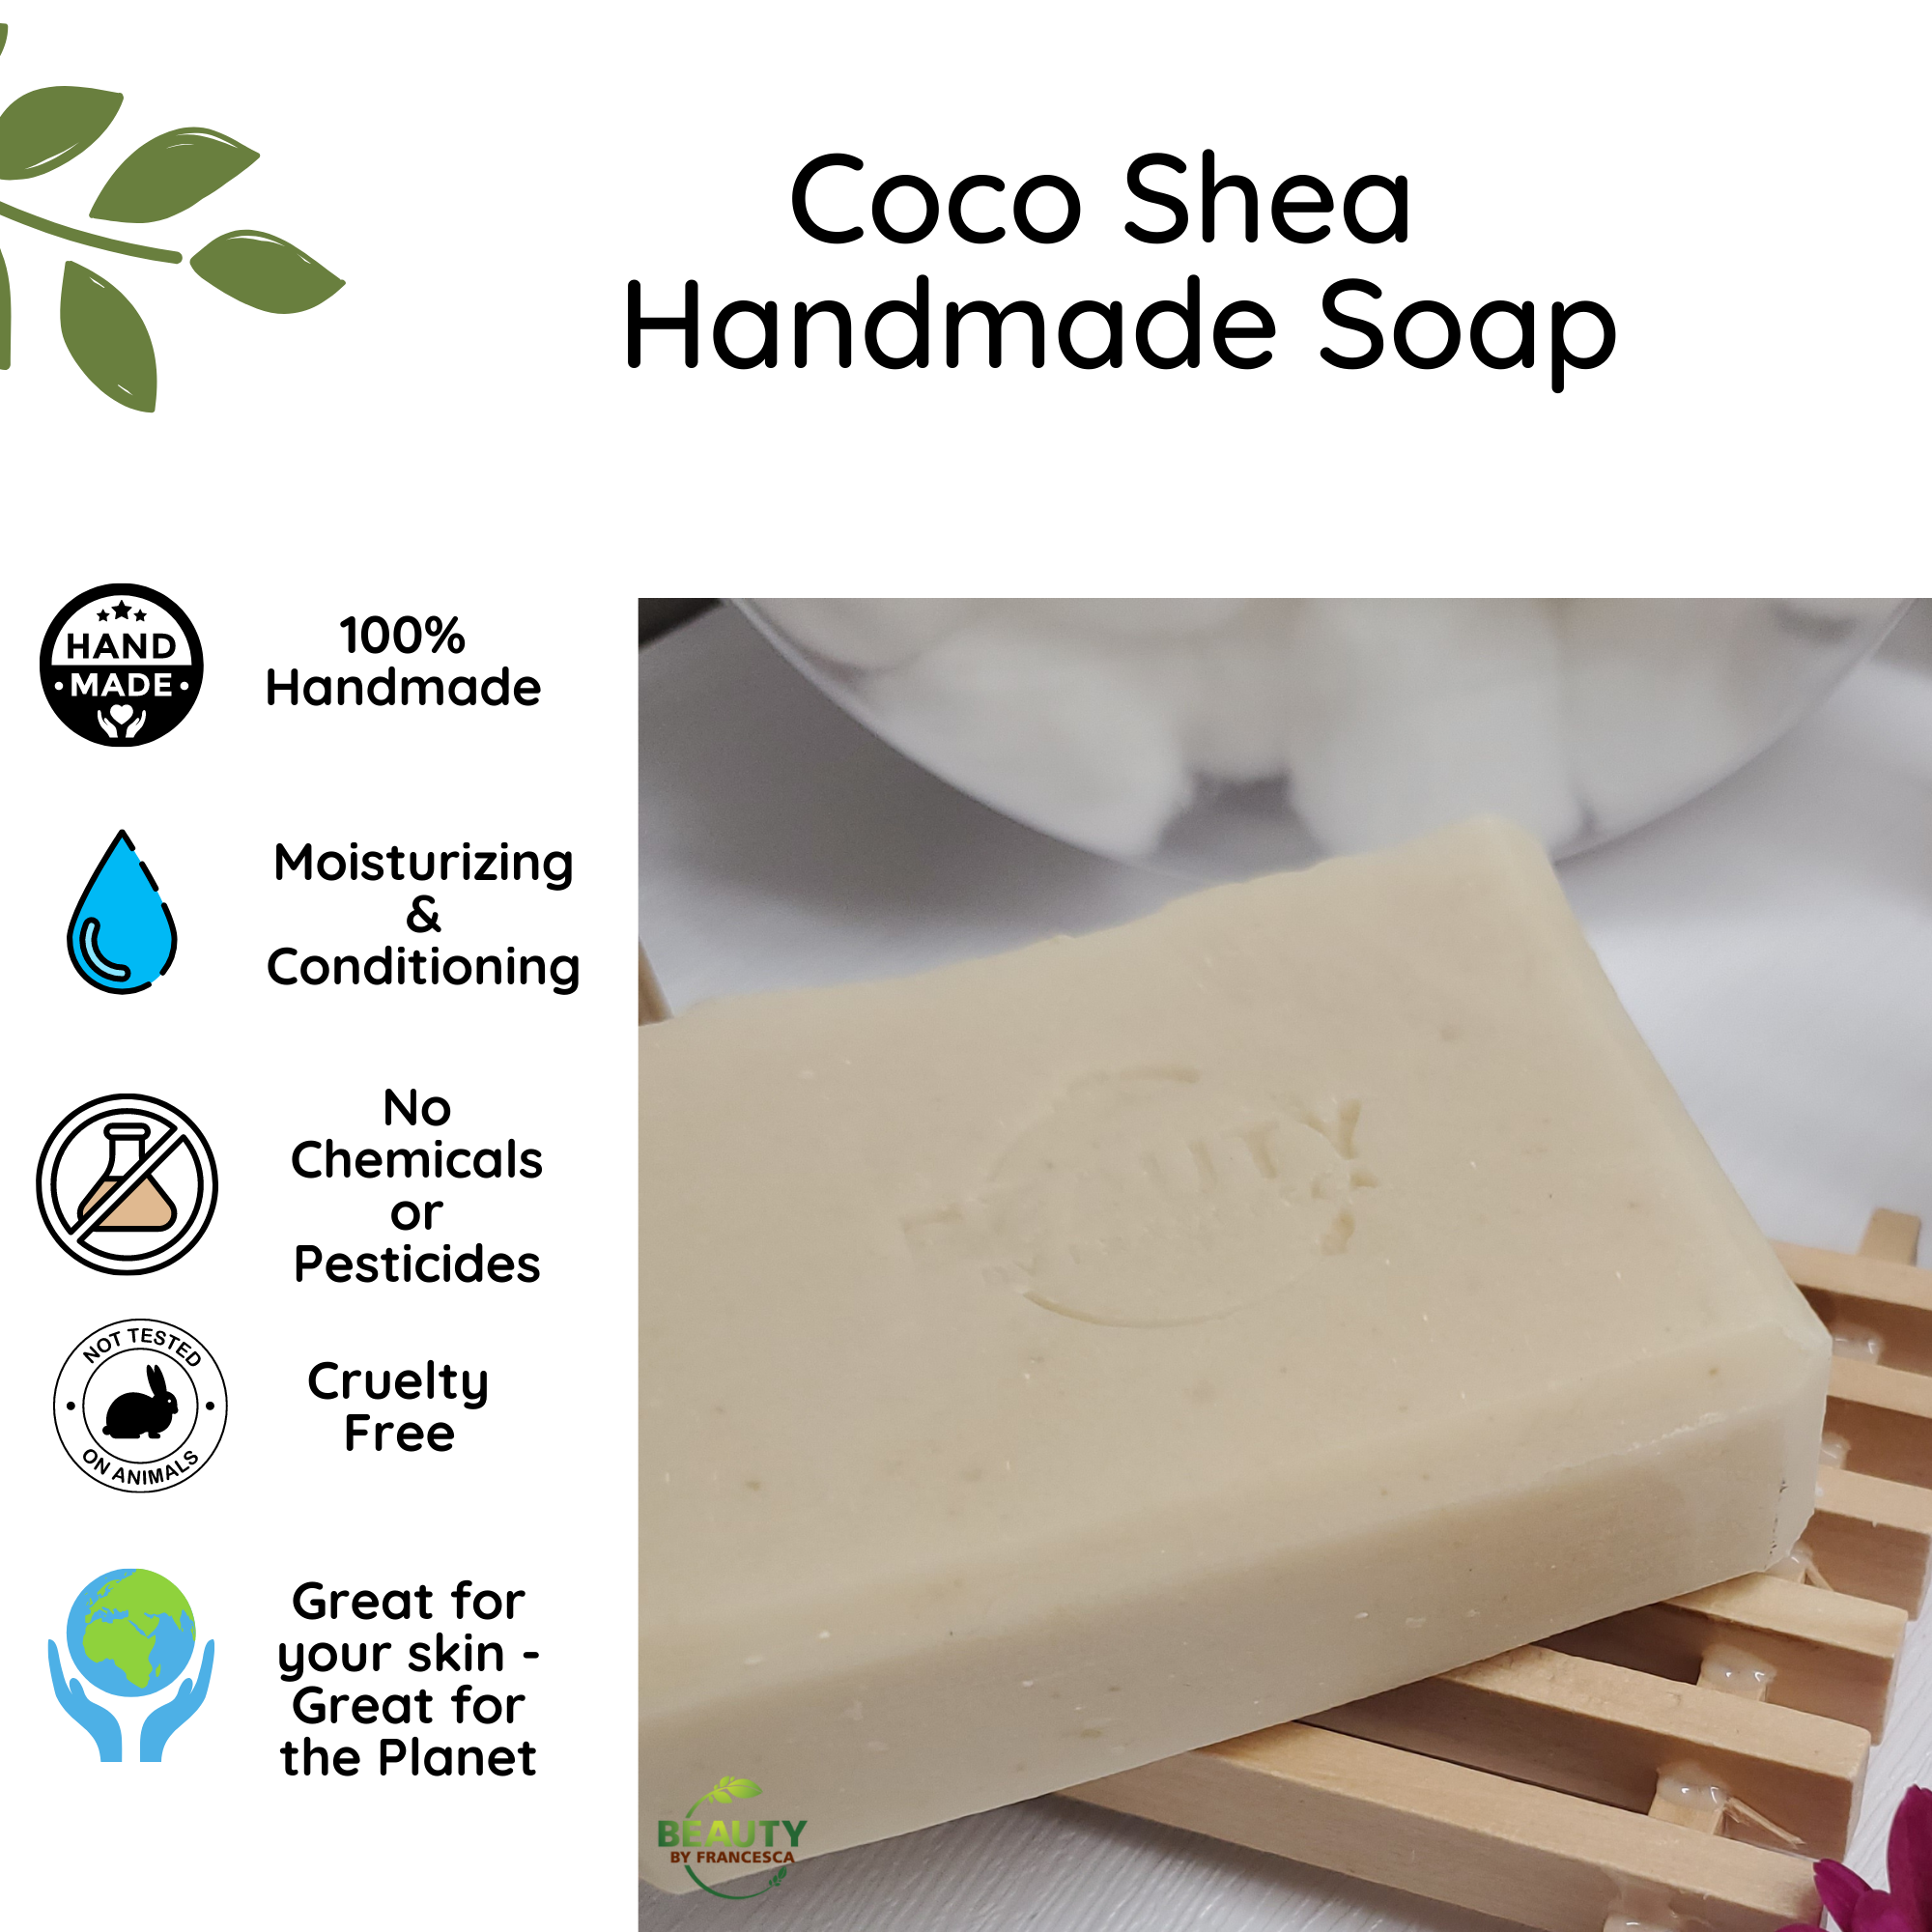 Coco shea handmade soap displayed with benefits card 100% handmade no chemicals